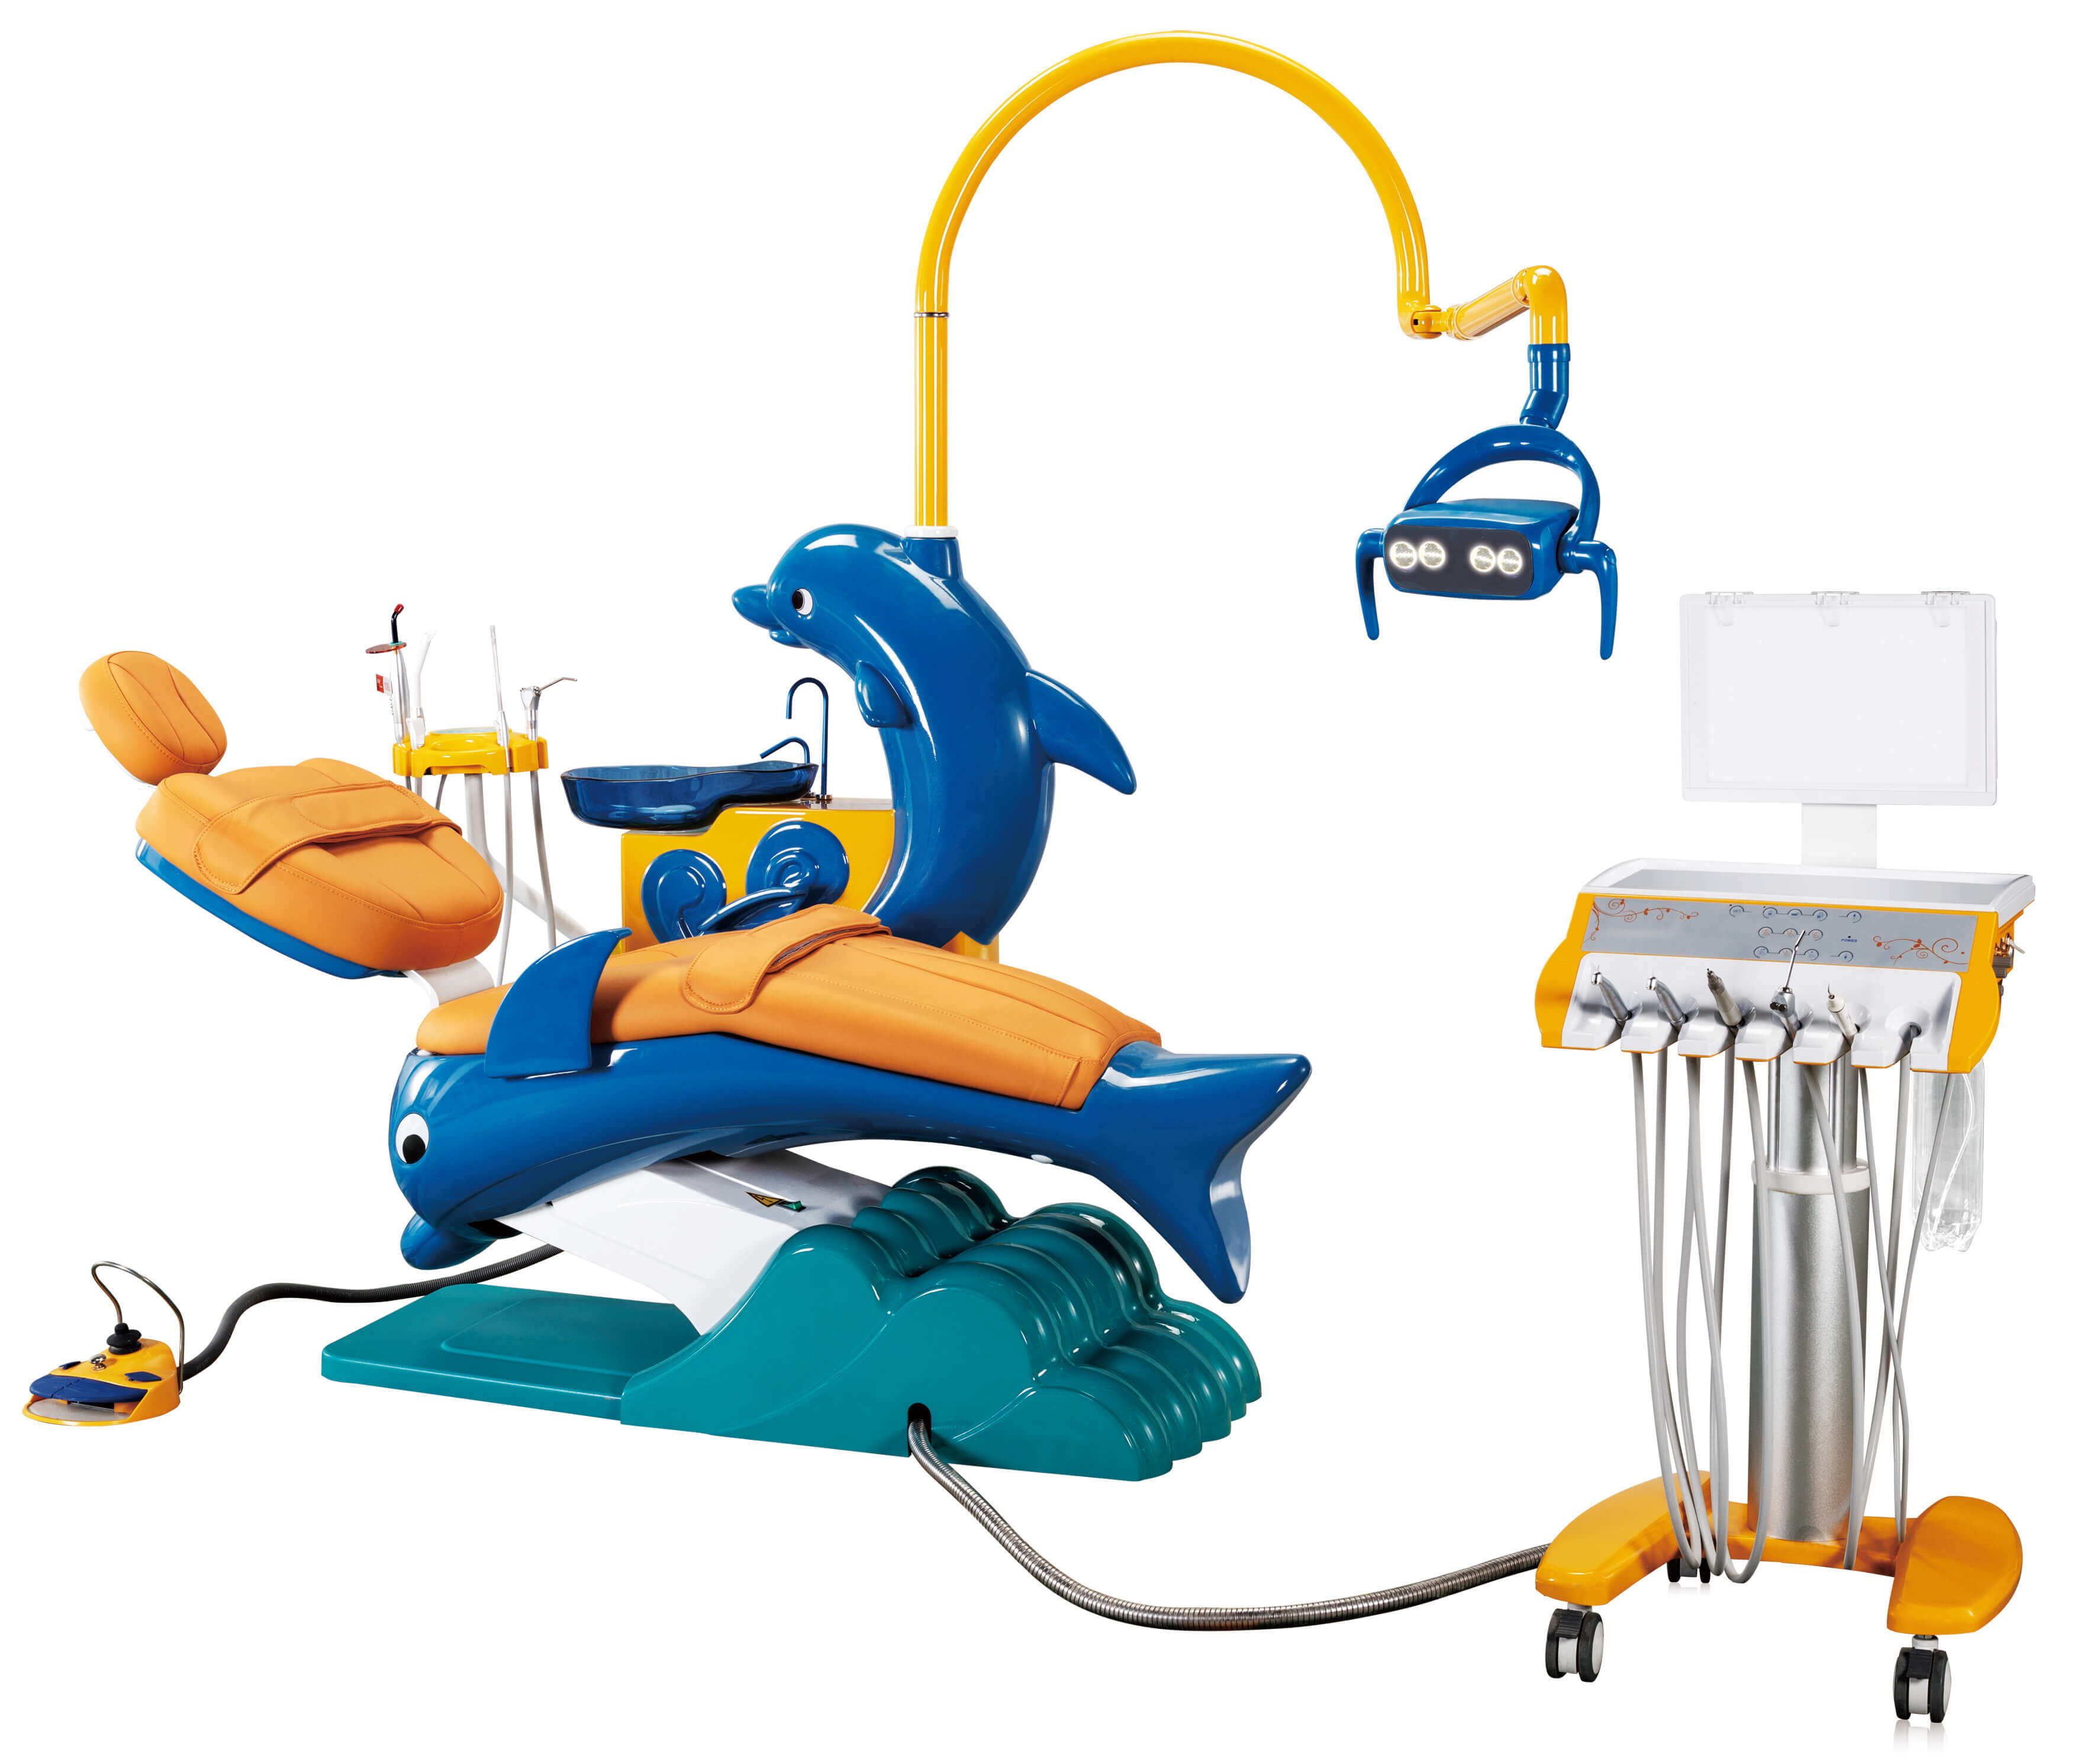 Why Children Dental Chair Unit is Important?